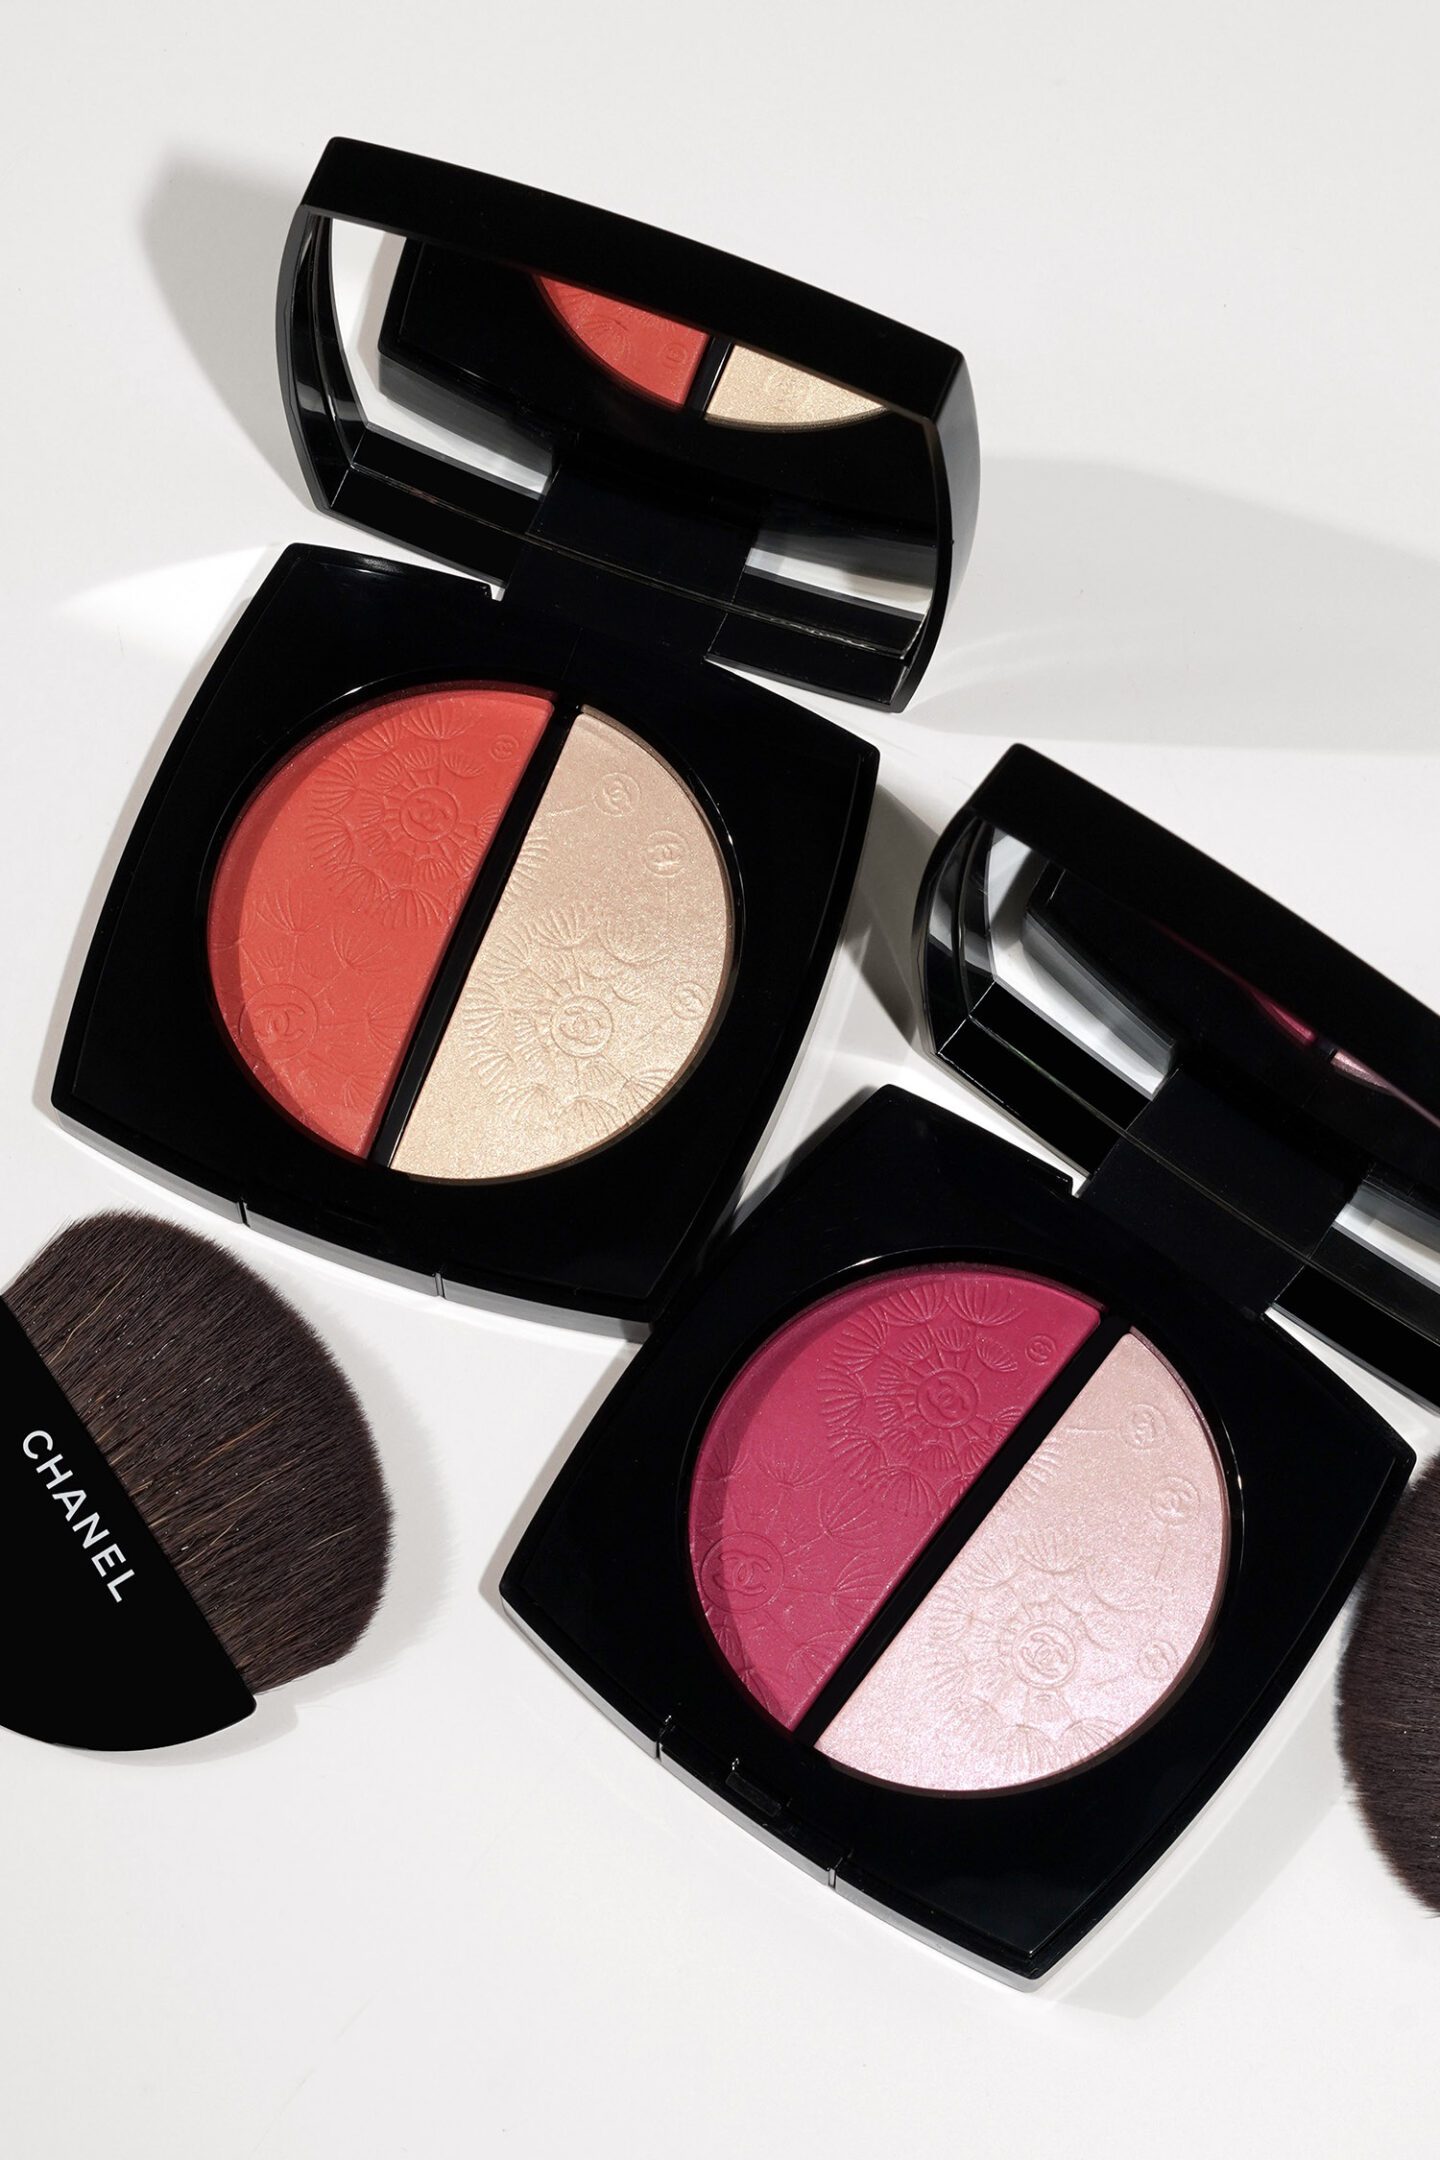 Chanel Jardin Imaginaire Blush and Highlighter Duos